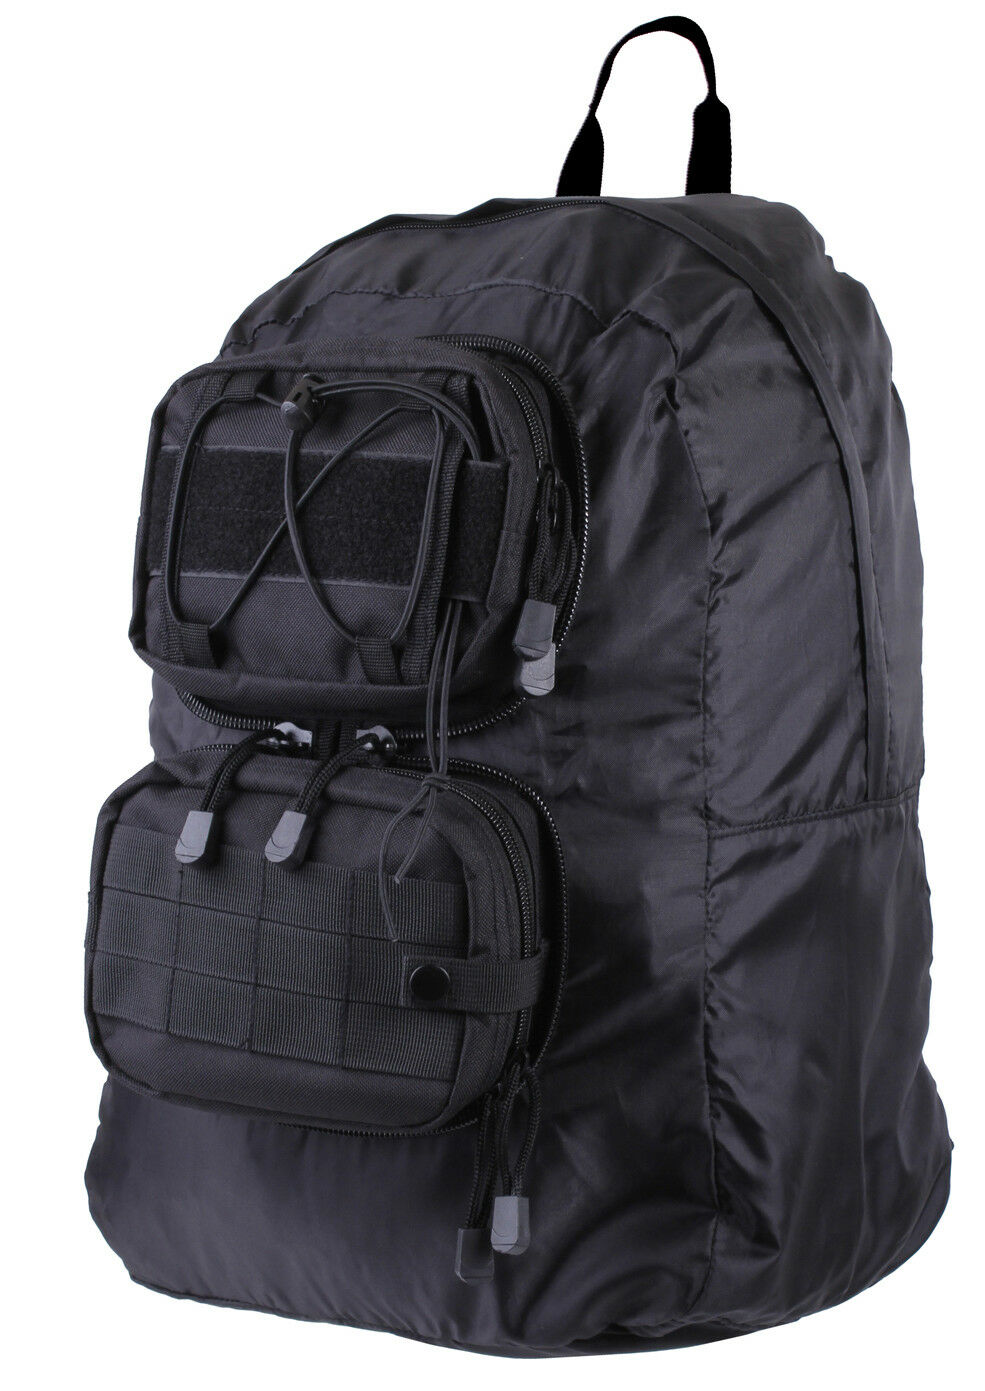 Tactical Foldable Pack Backpack Converts from Pouch To Backpack Rothco 27710